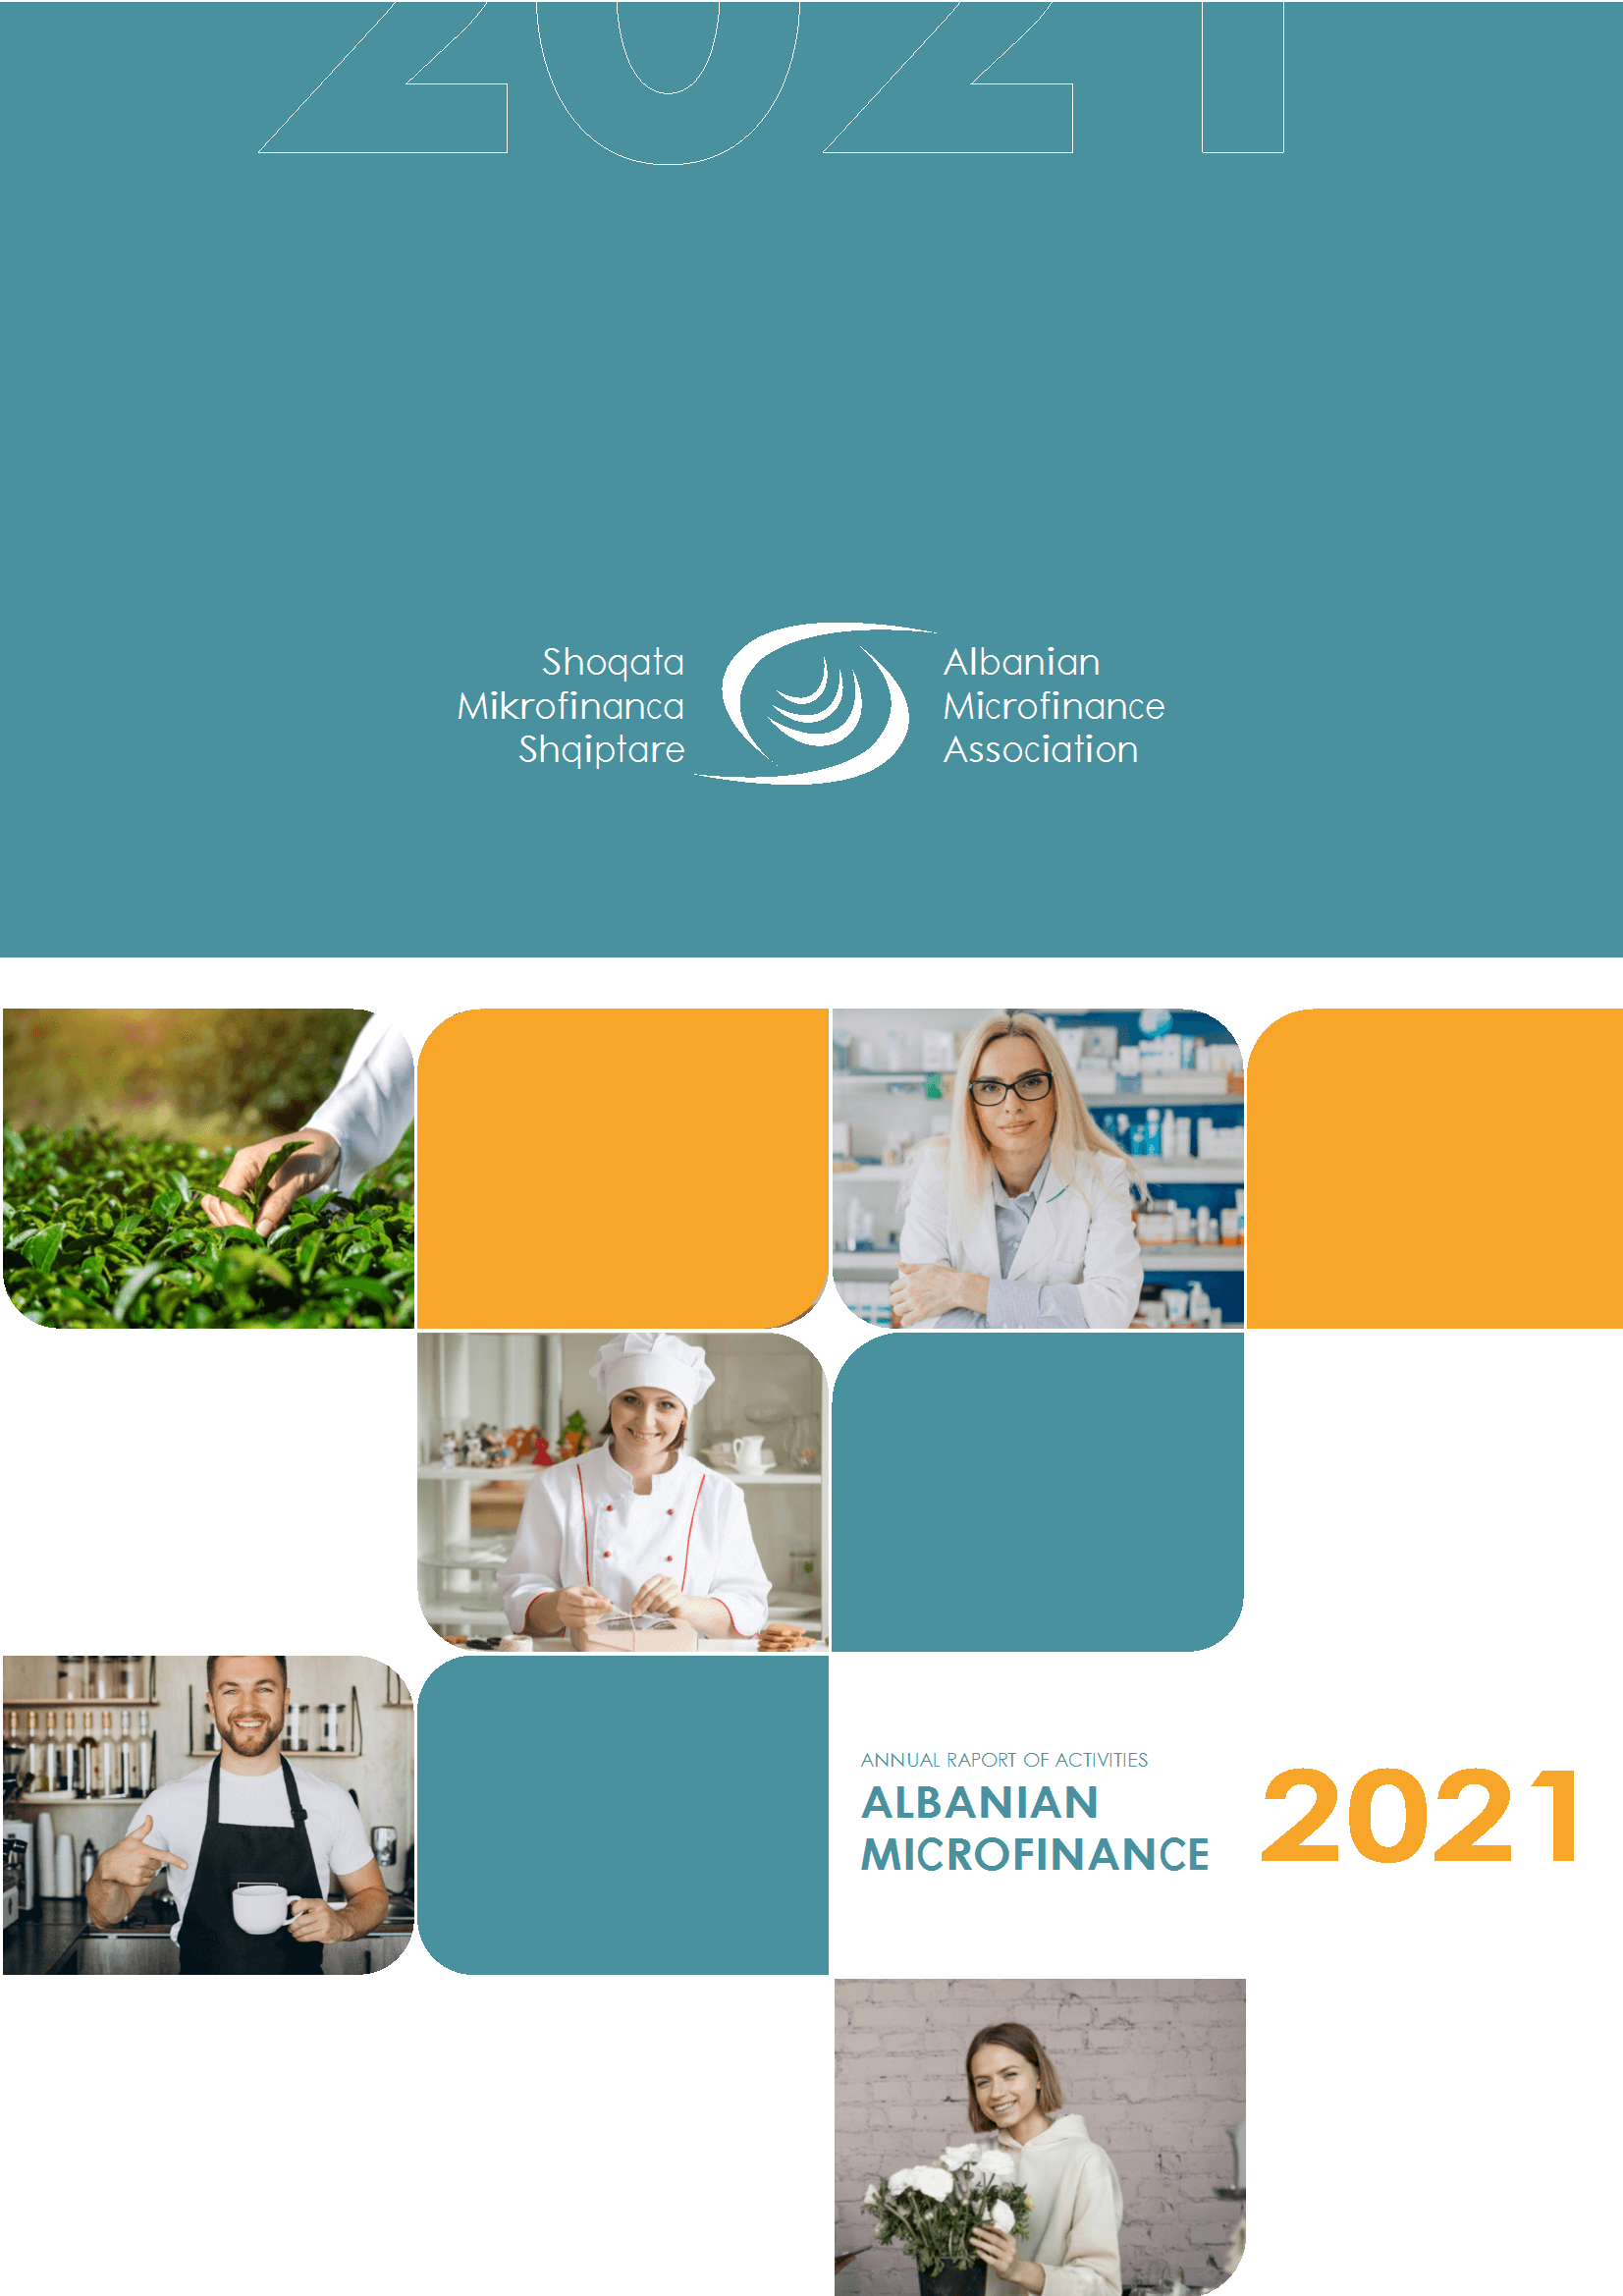 Annual Report of Activities 2021